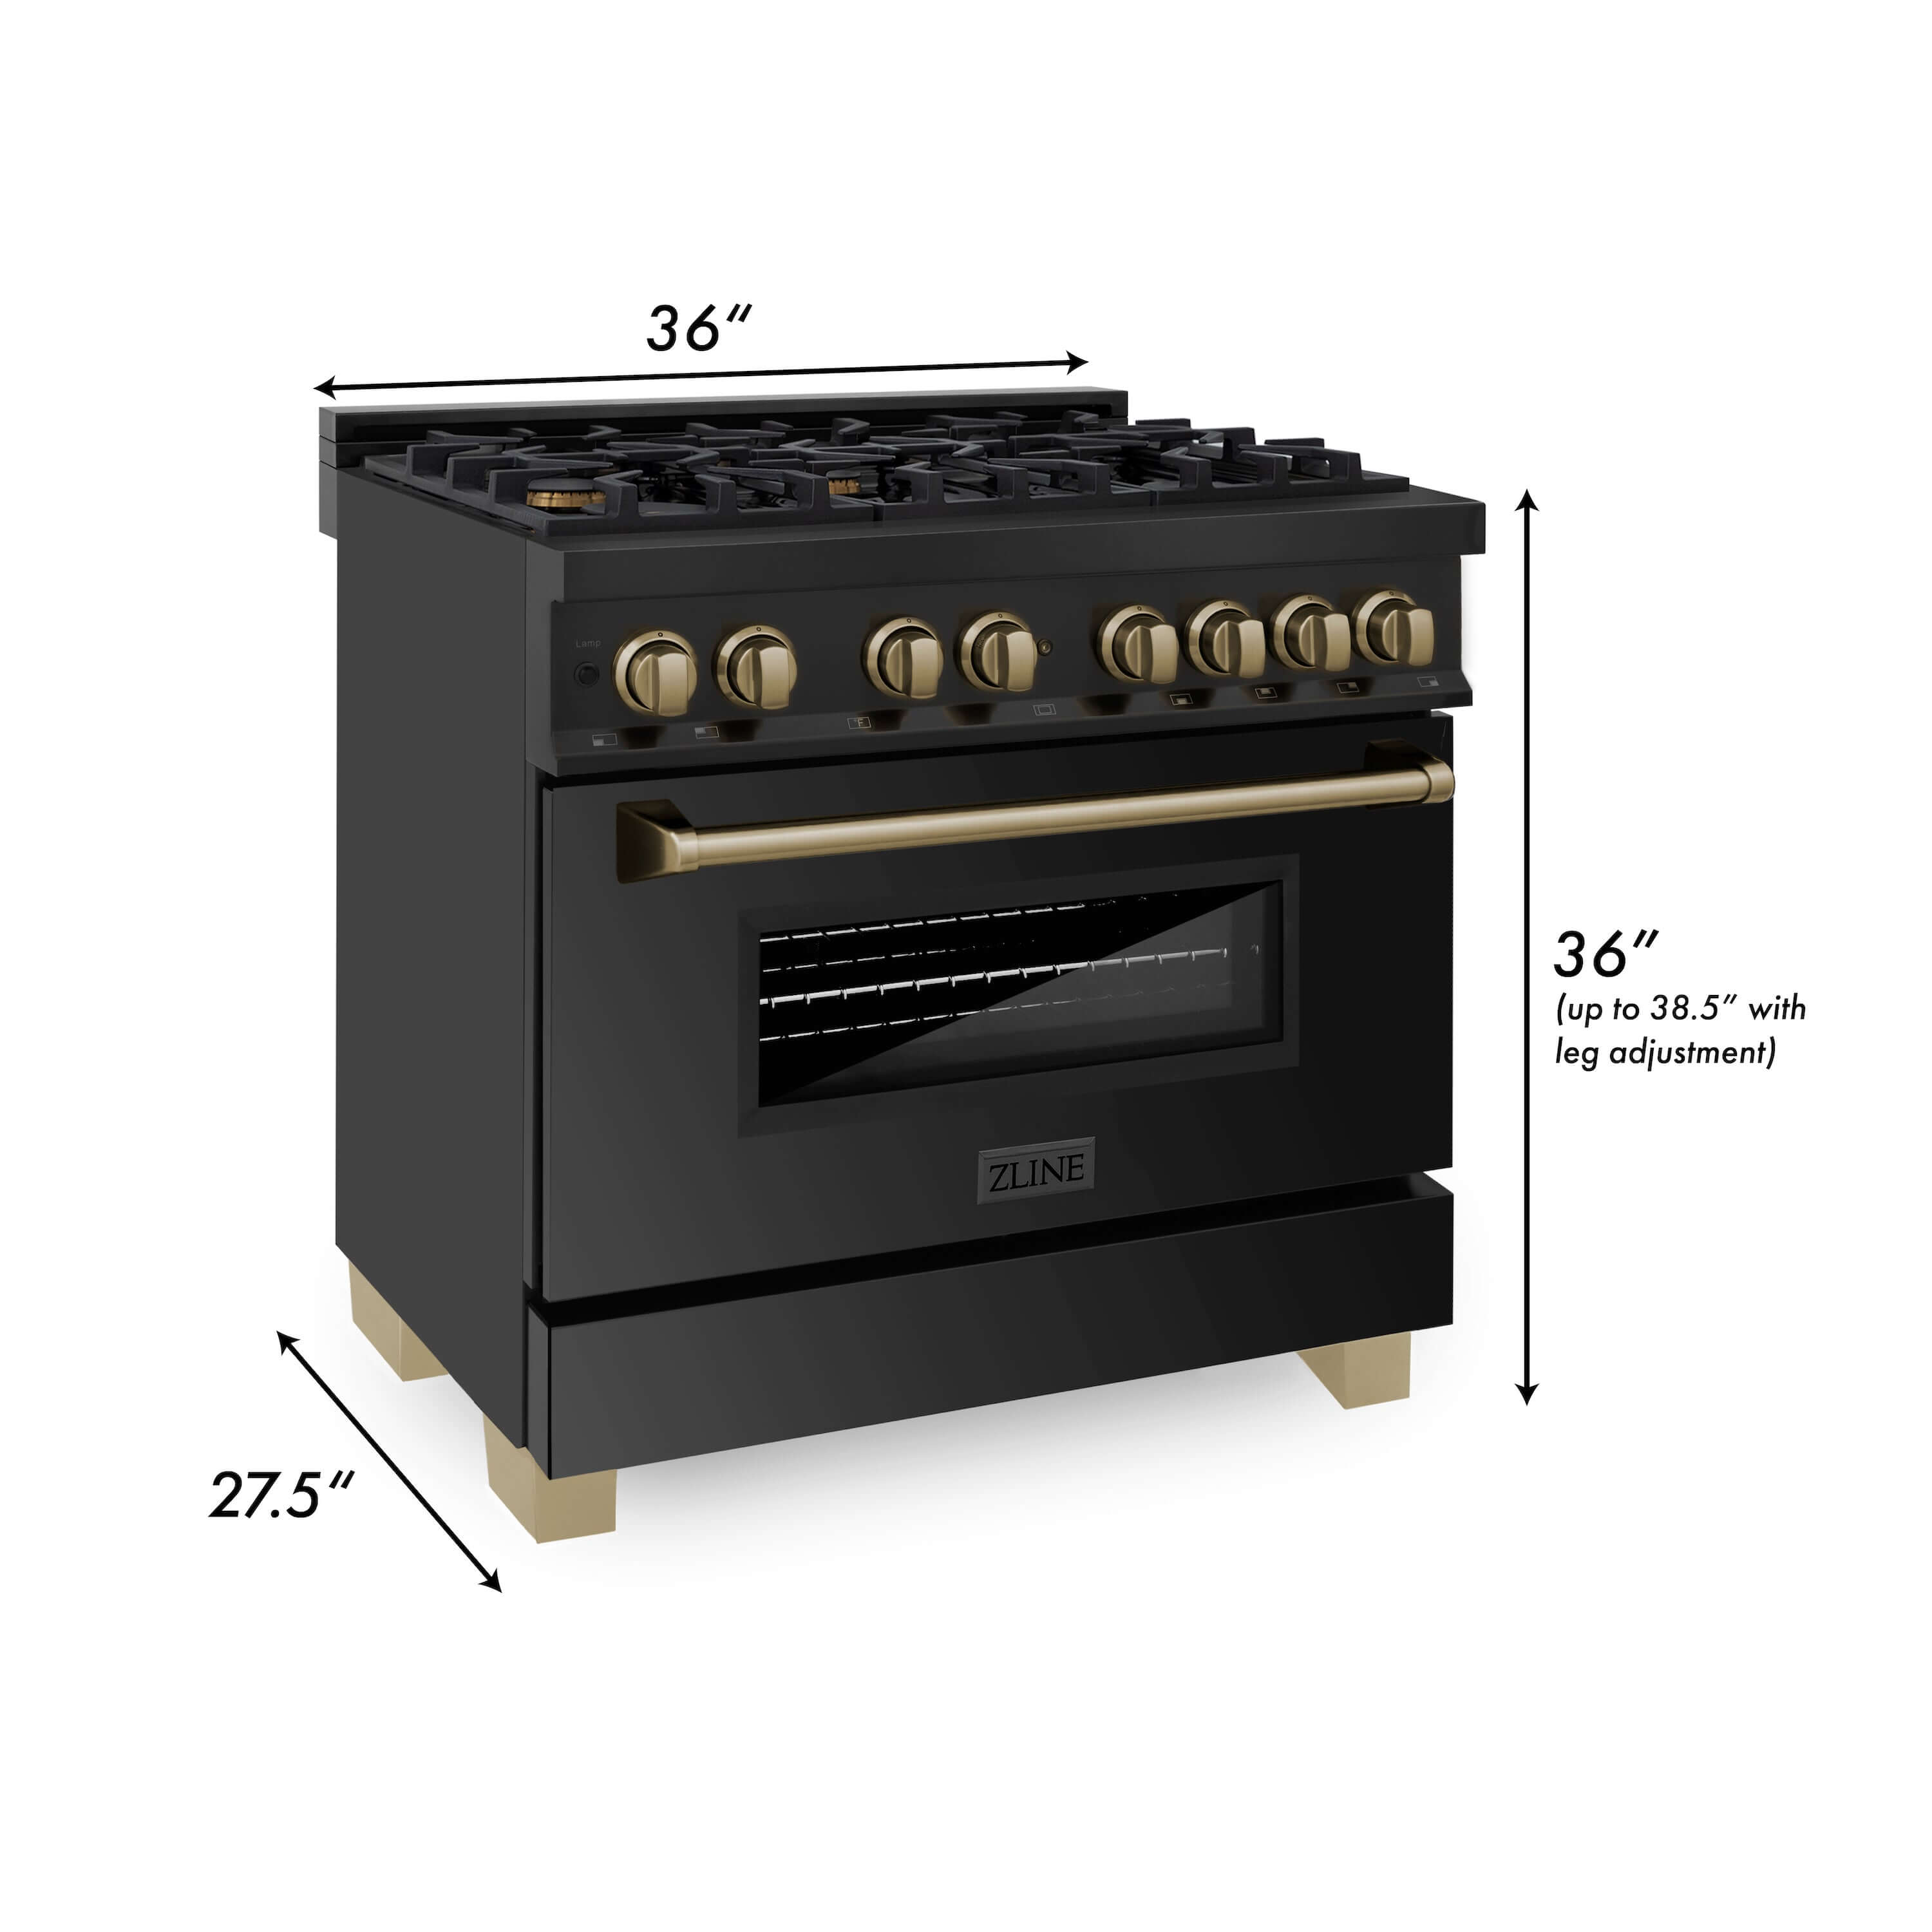 ZLINE Autograph Edition 36 in. Kitchen Package with Black Stainless Steel Dual Fuel Range and Range Hood with Champagne Bronze Accents (2AKP-RABRH36-CB) dimensional diagram with measurements.